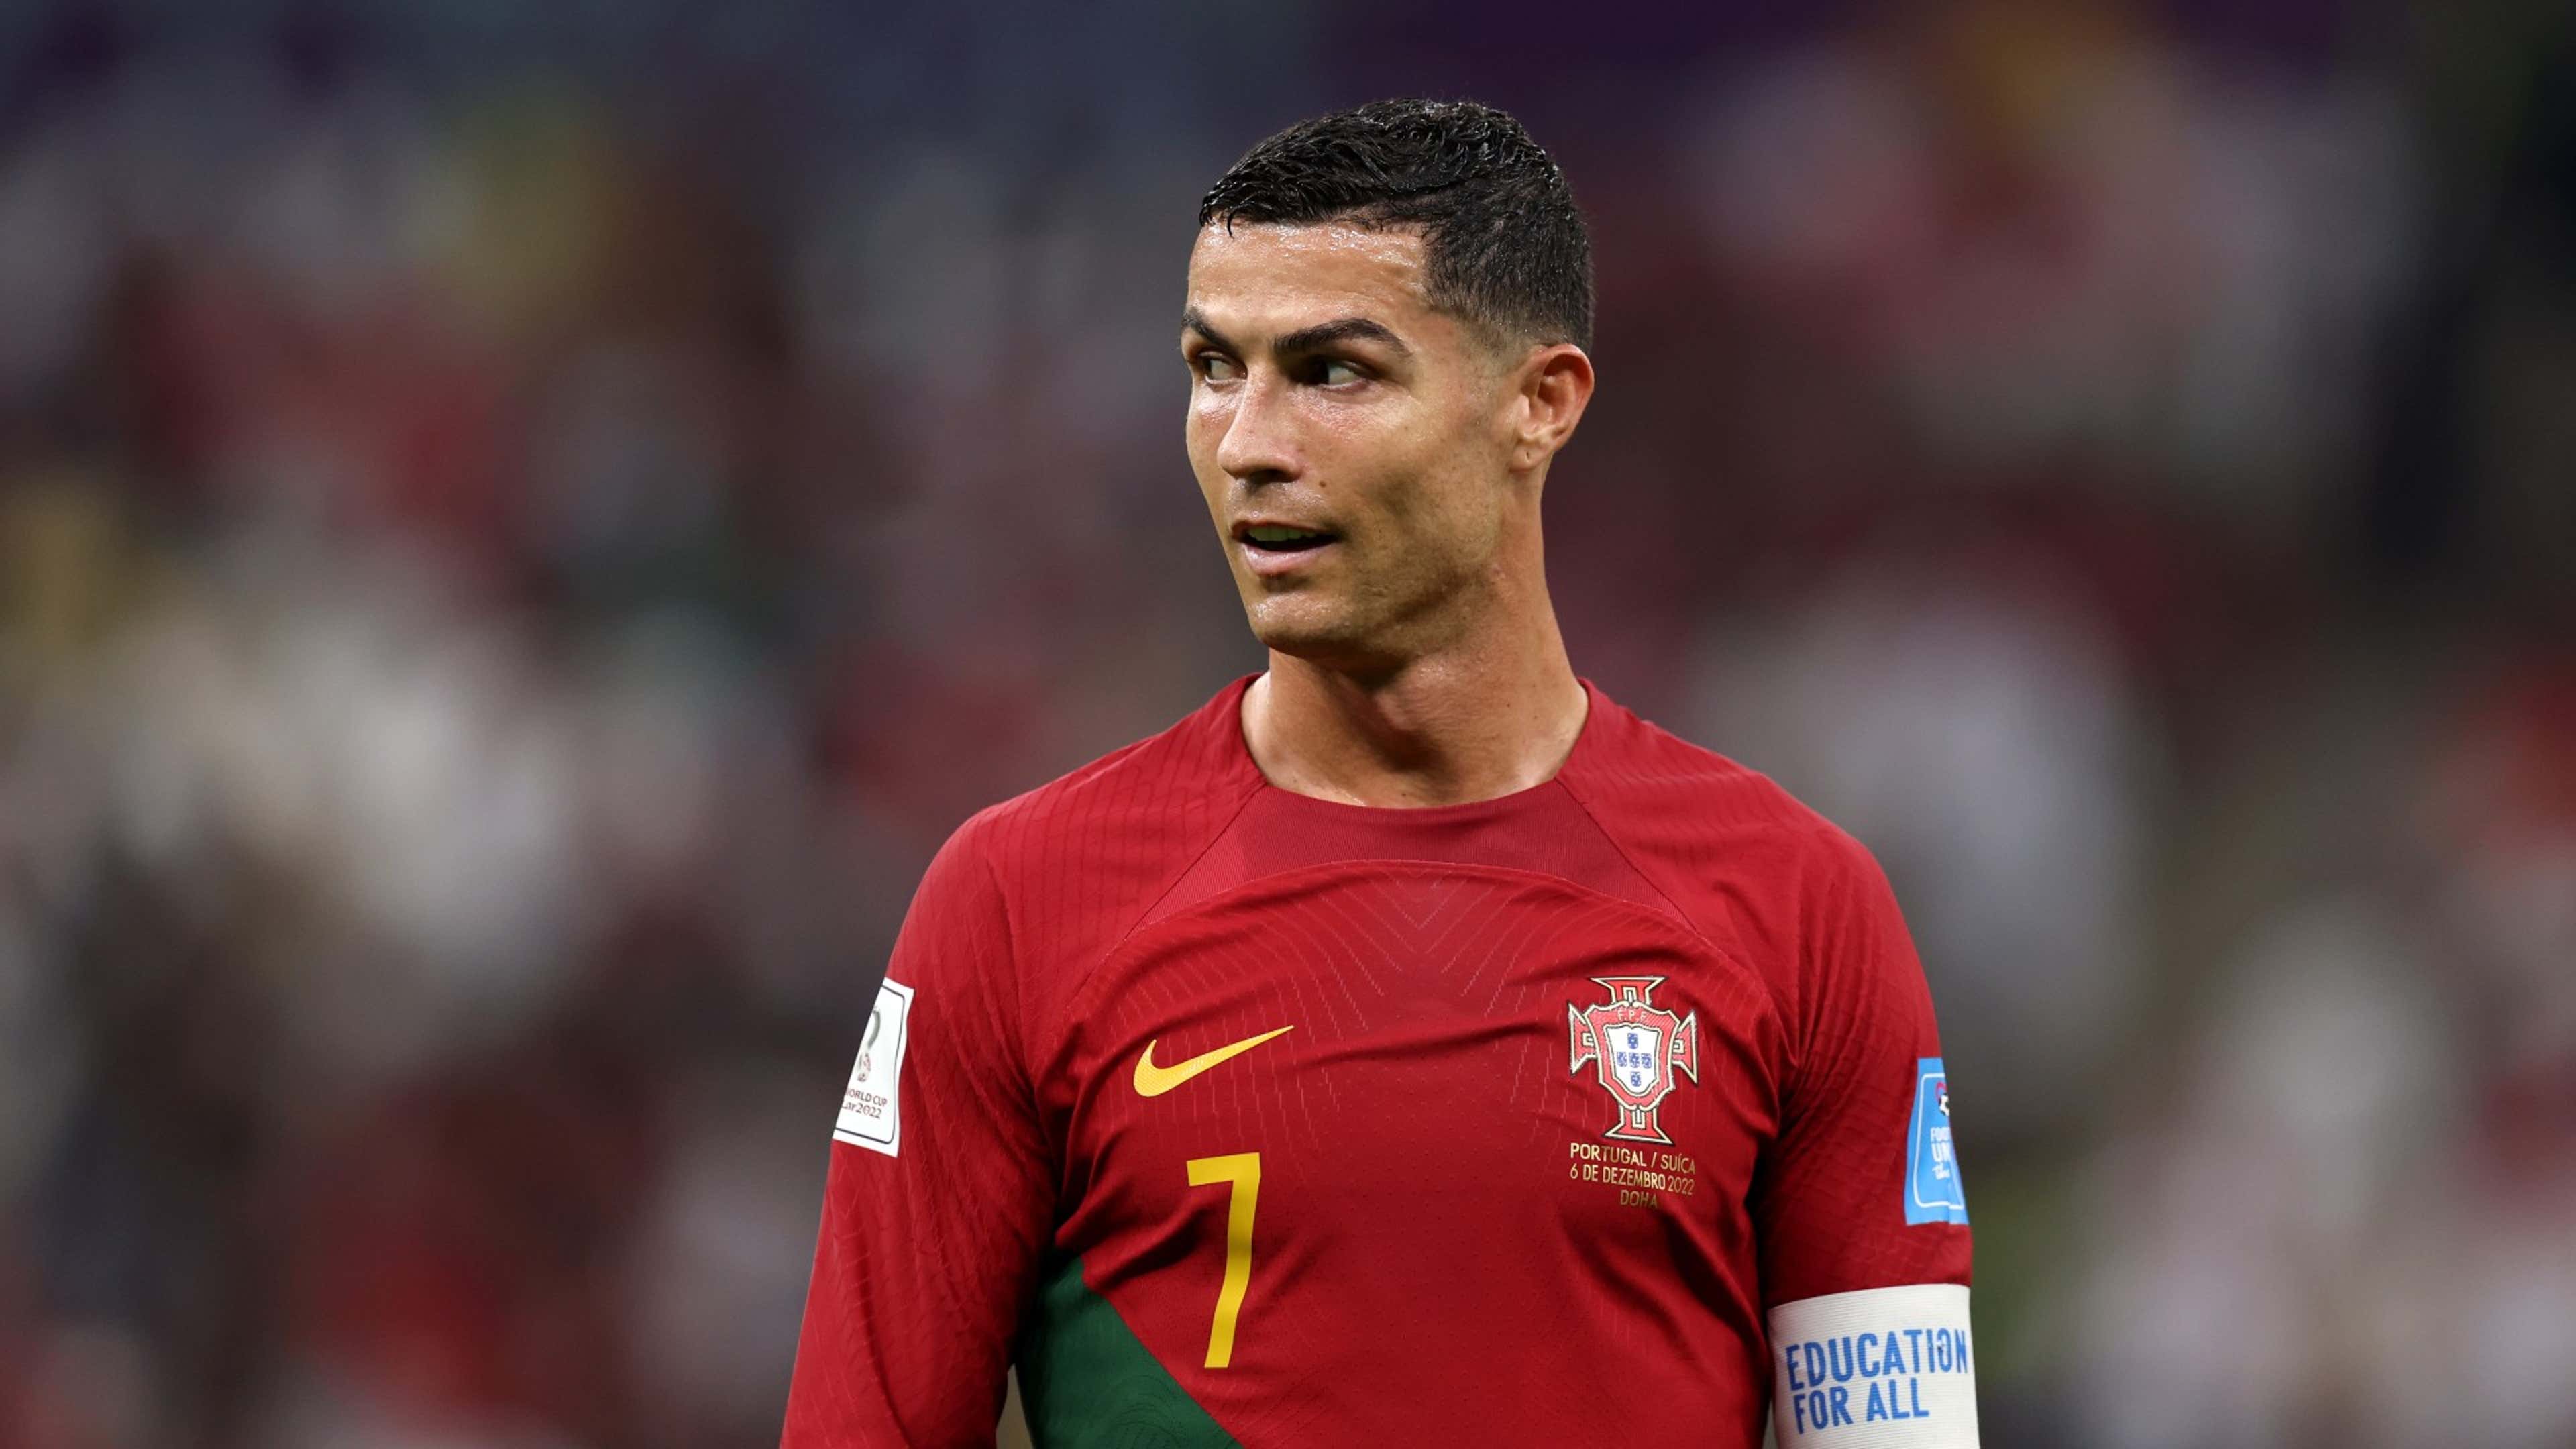 FIFA 23's Team of the Year doesn't include Ronaldo or Haaland